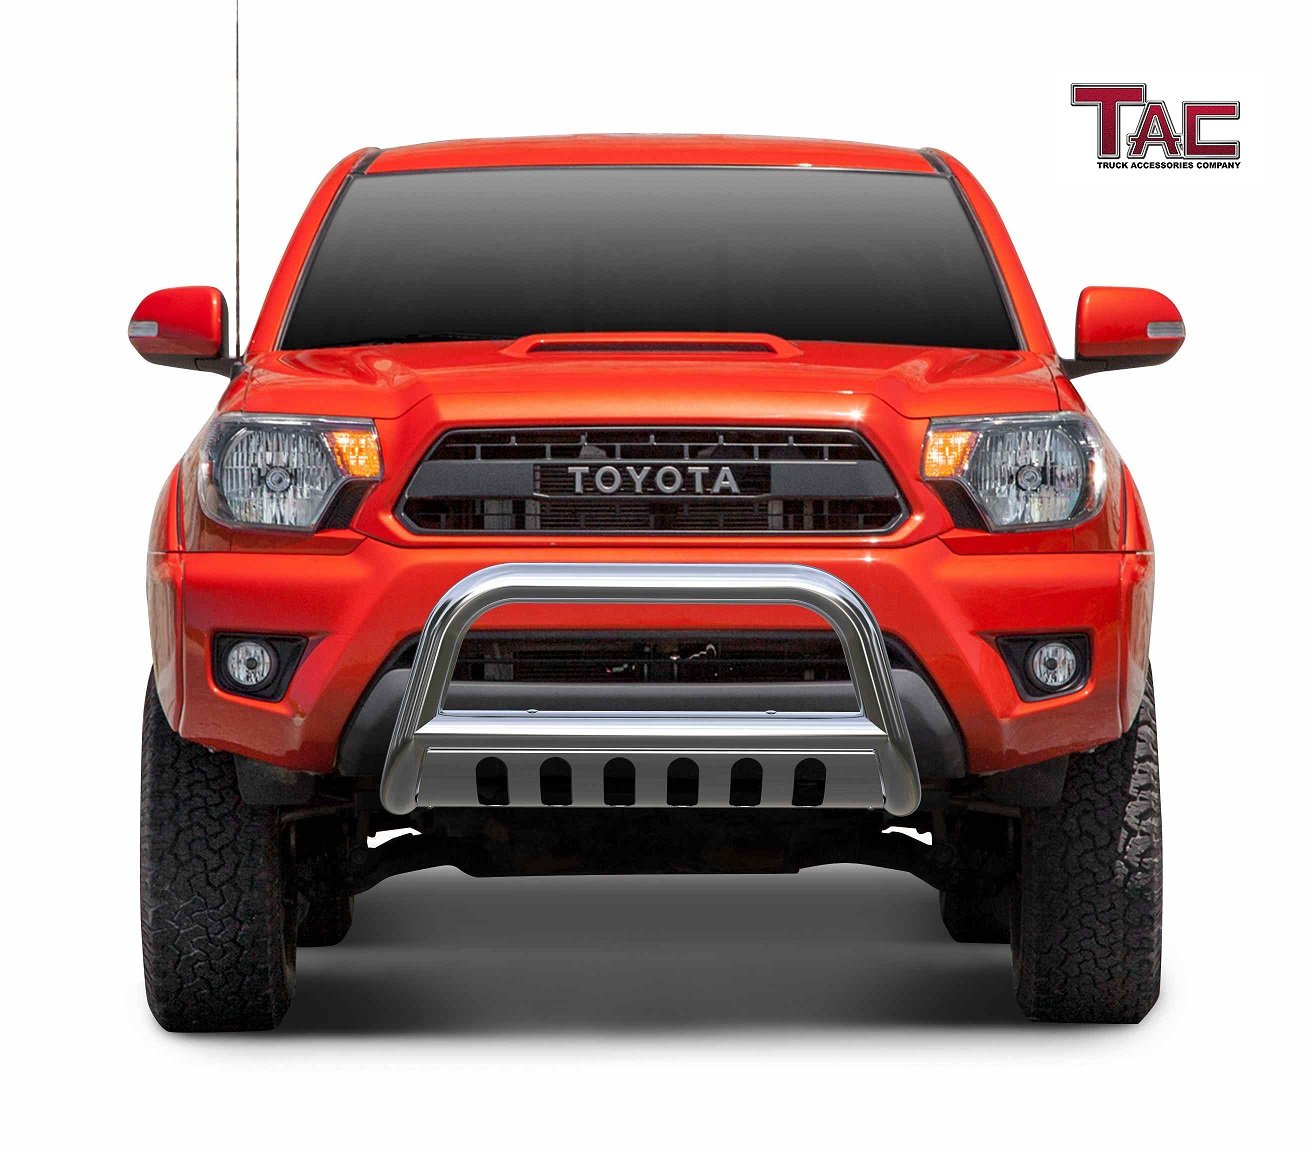 TAC Stainless Steel 3" Bull Bar For 2005-2015 Toyota Tacoma Truck Front Bumper Brush Grille Guard Nudge Bar - 0